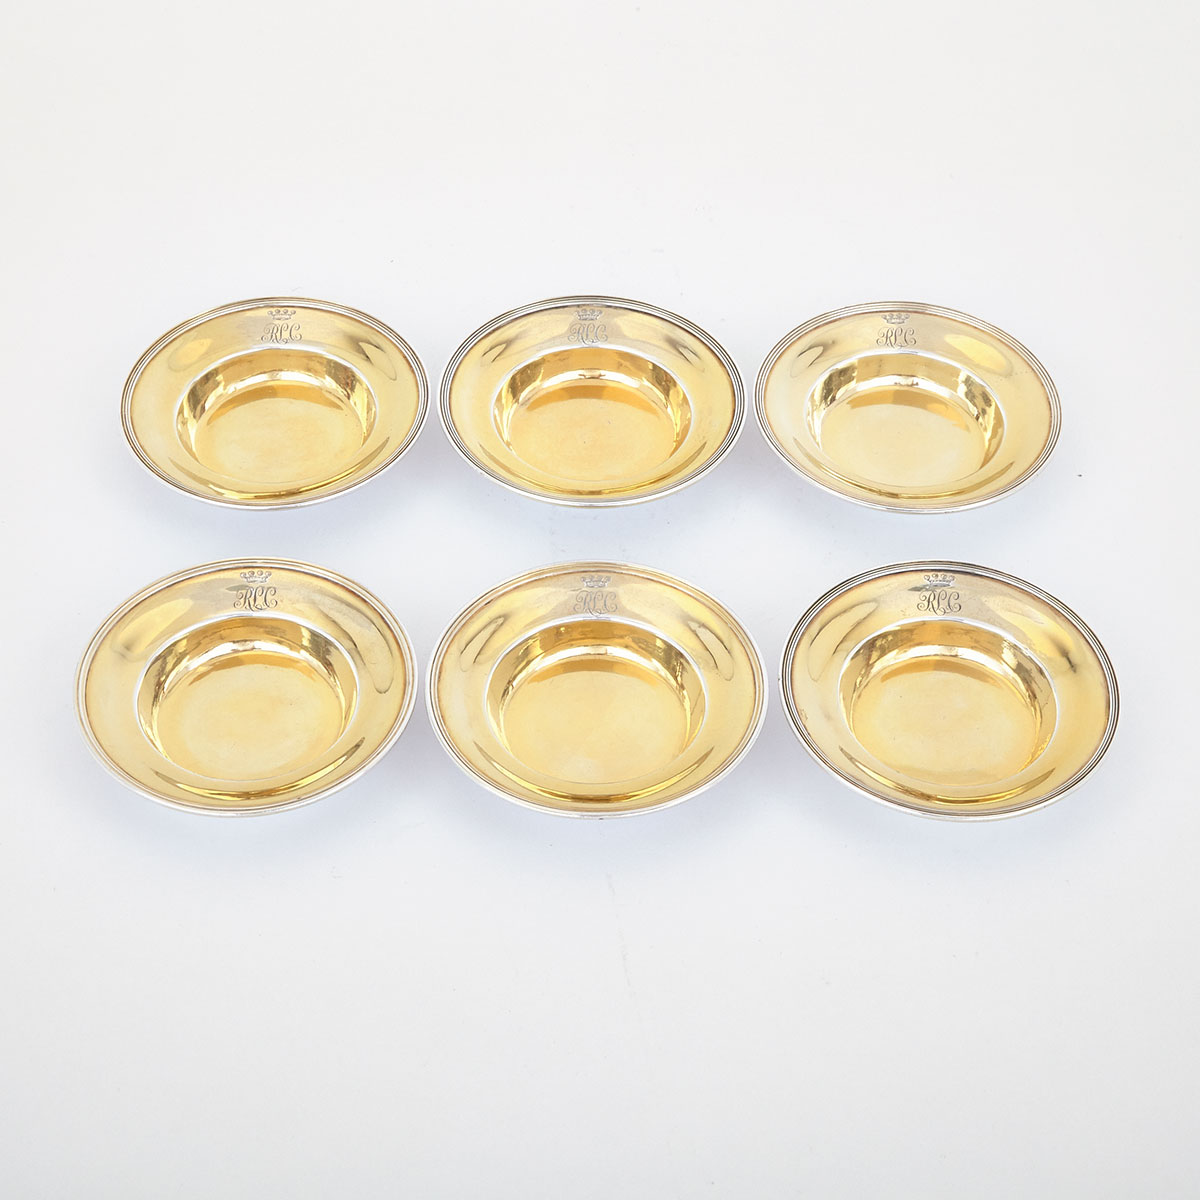 Set of Six George III Silver-Gilt Almond Dishes, Robert & David Hennell, London, 1800